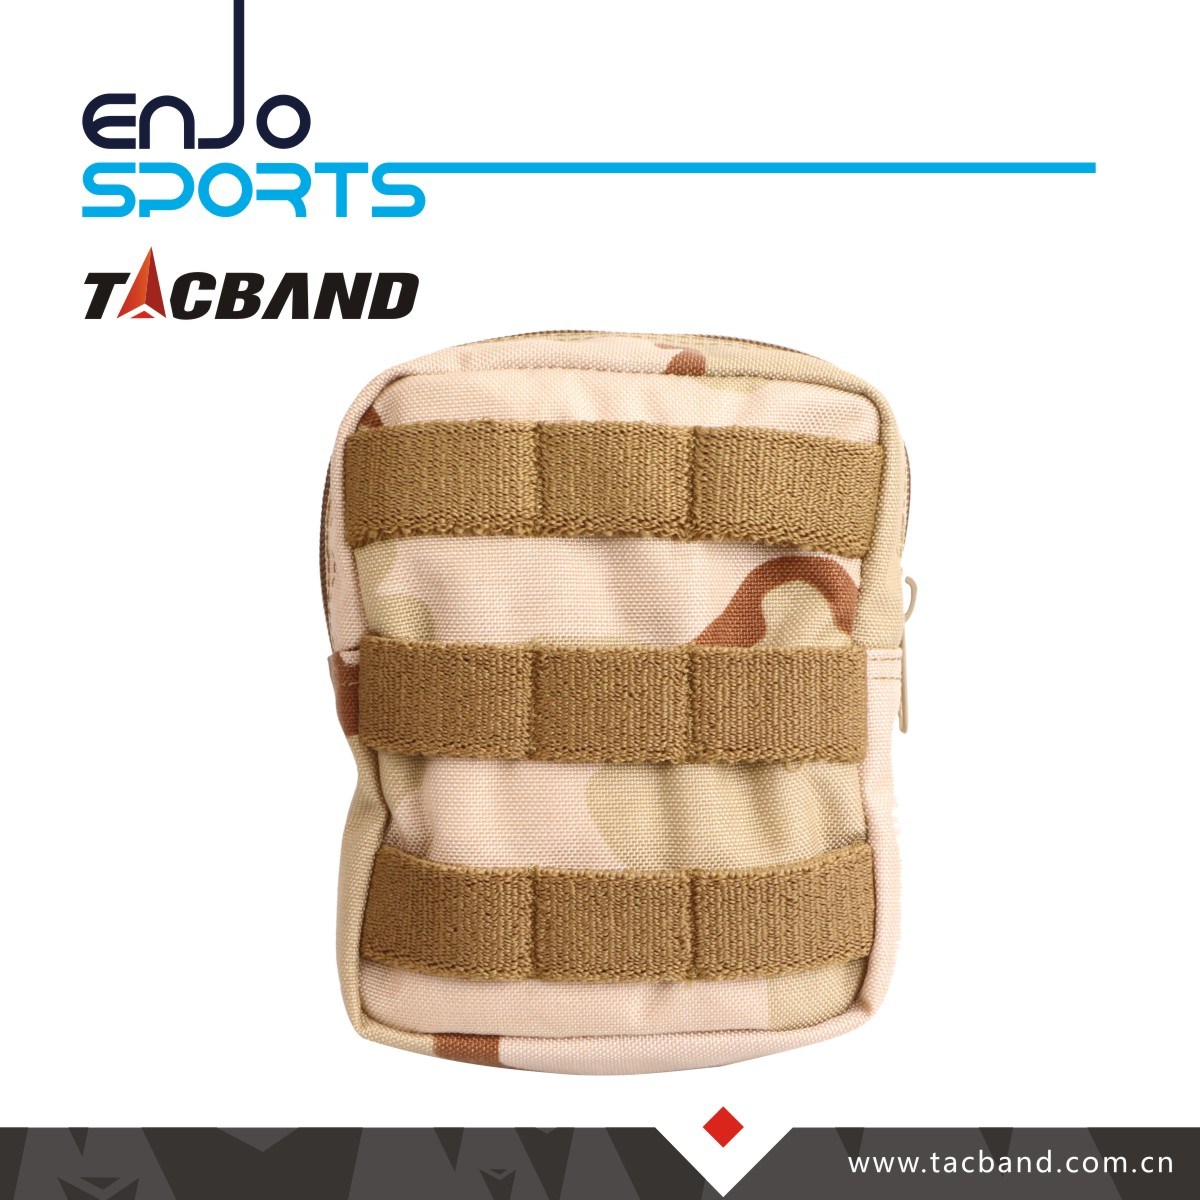 Tactical First Aid Medical Emergency Oxford Bag for outdoor Sport